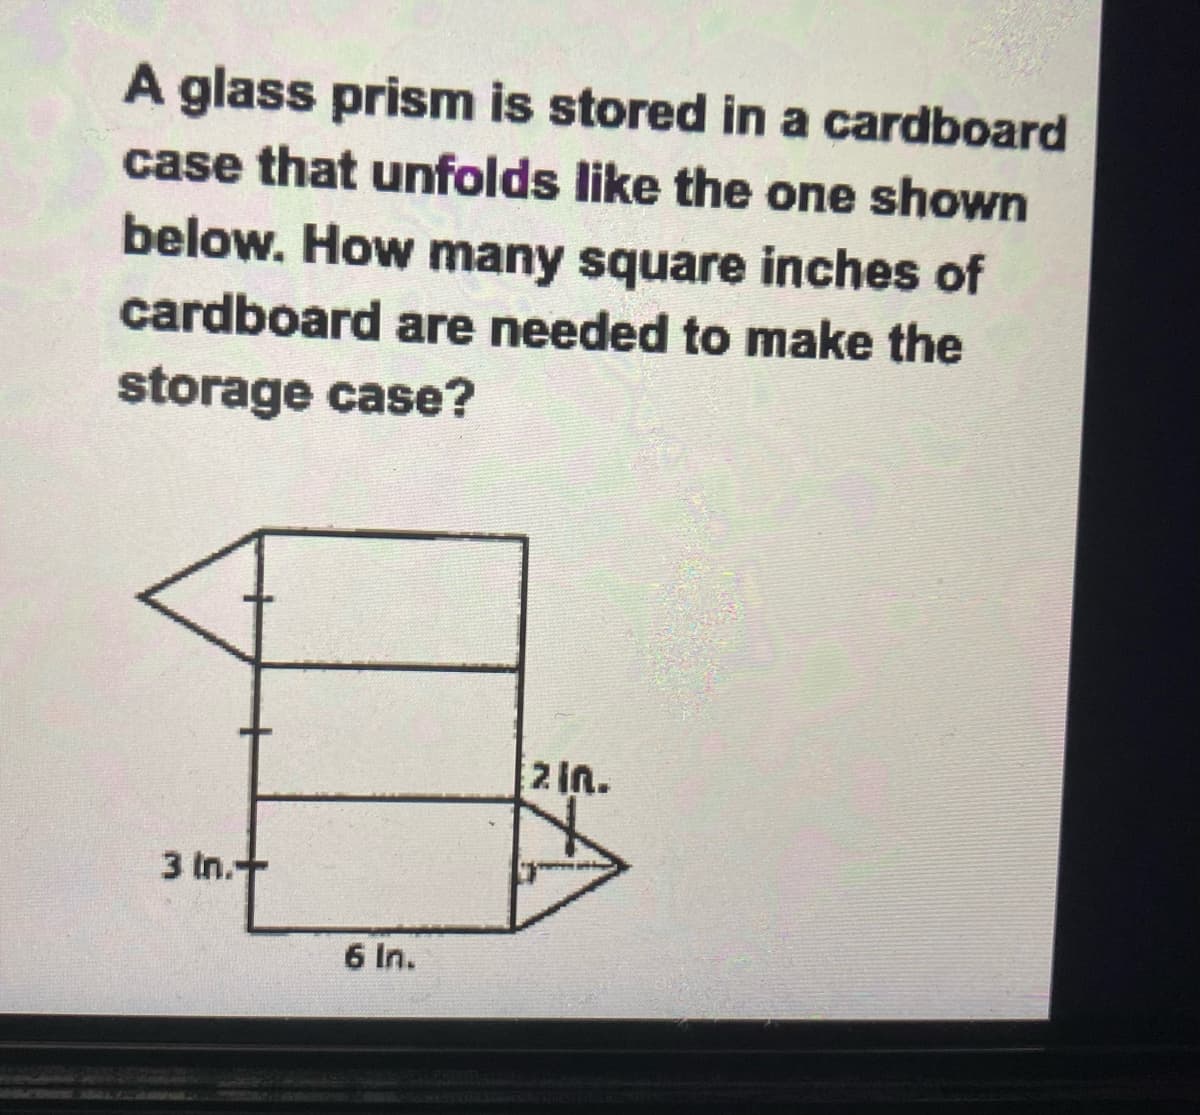 A glass prism is stored in a cardboard
case that unfolds like the one shown
below. How many square inches of
cardboard are needed to make the
storage case?
3 In.
6 In.
